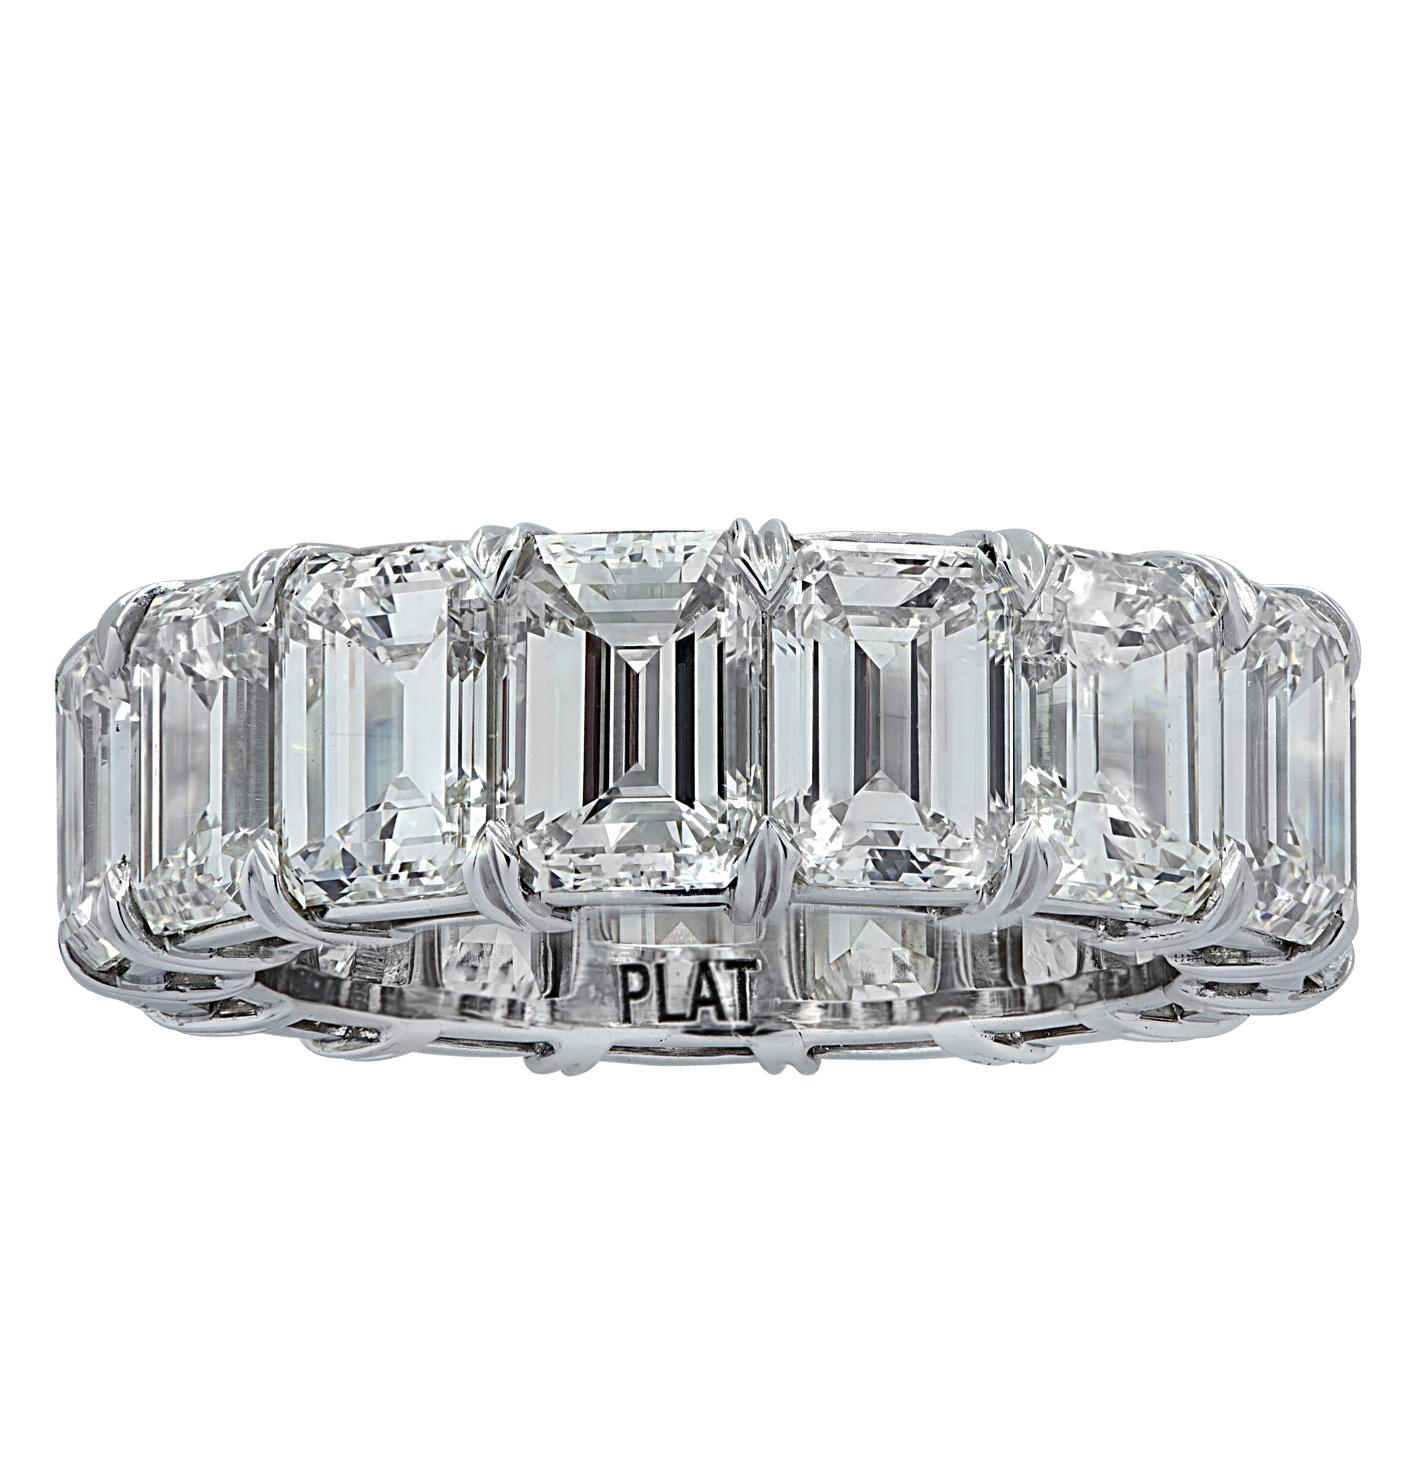 Exquisite eternity band crafted in Platinum, showcasing 15 stunning emerald cut diamonds weighing 15.57 carats total,  J-K color, VS clarity. Each diamond was carefully selected, perfectly matched and set in a seamless sea of eternity, creating a